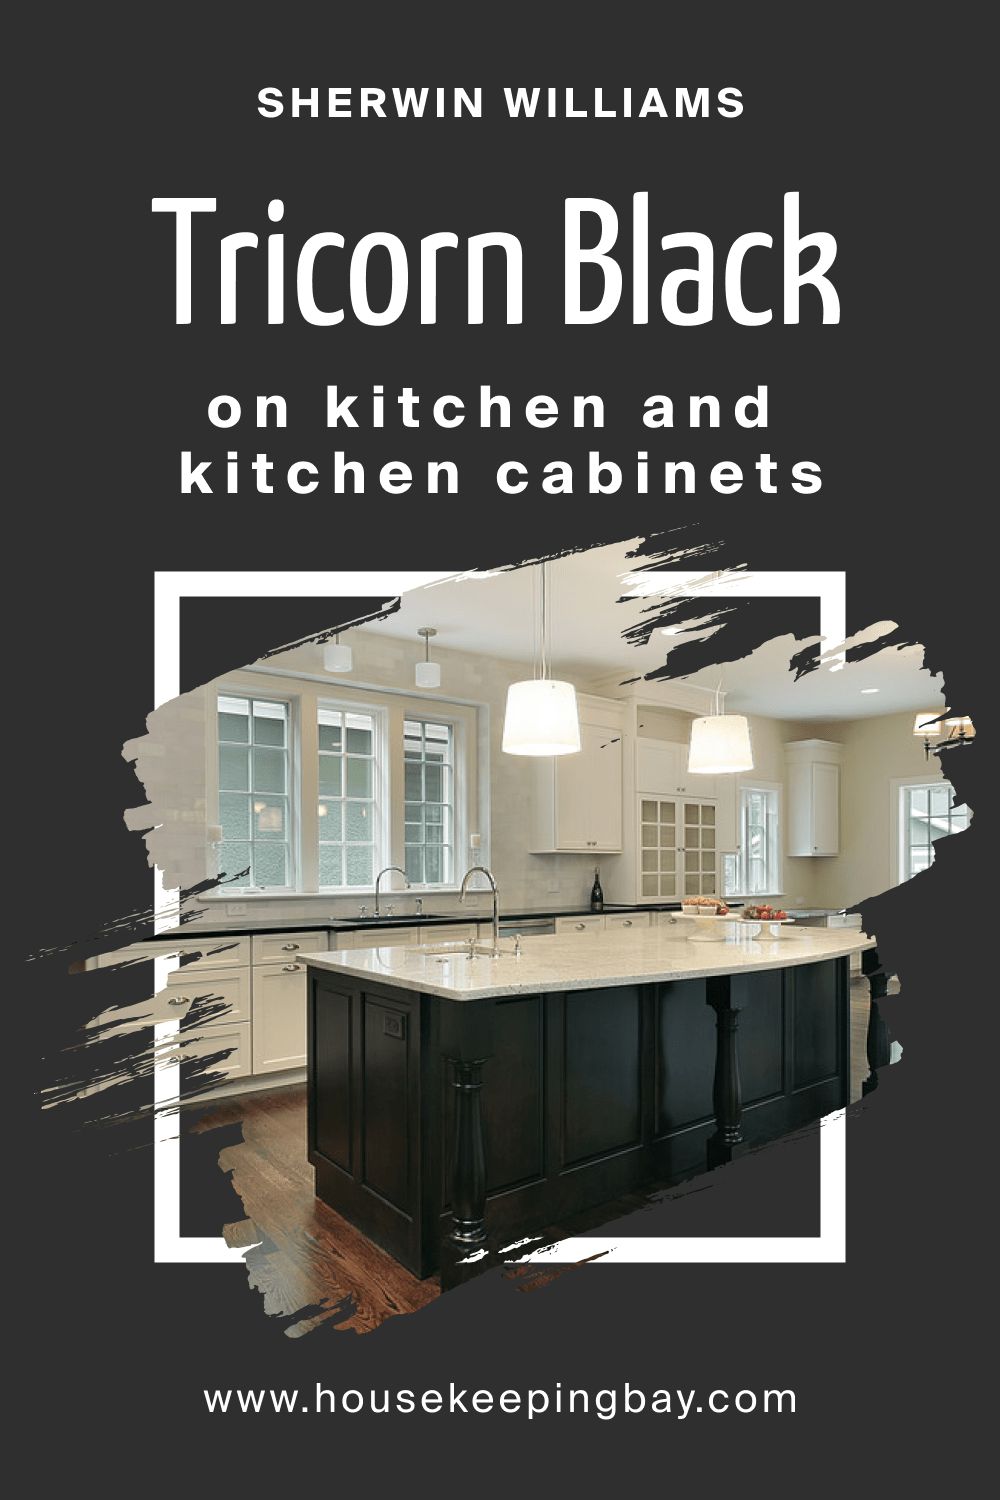 Sherwin Williams. SW 6258 Tricorn Black For the Kitchen and Kitchen Cabinets